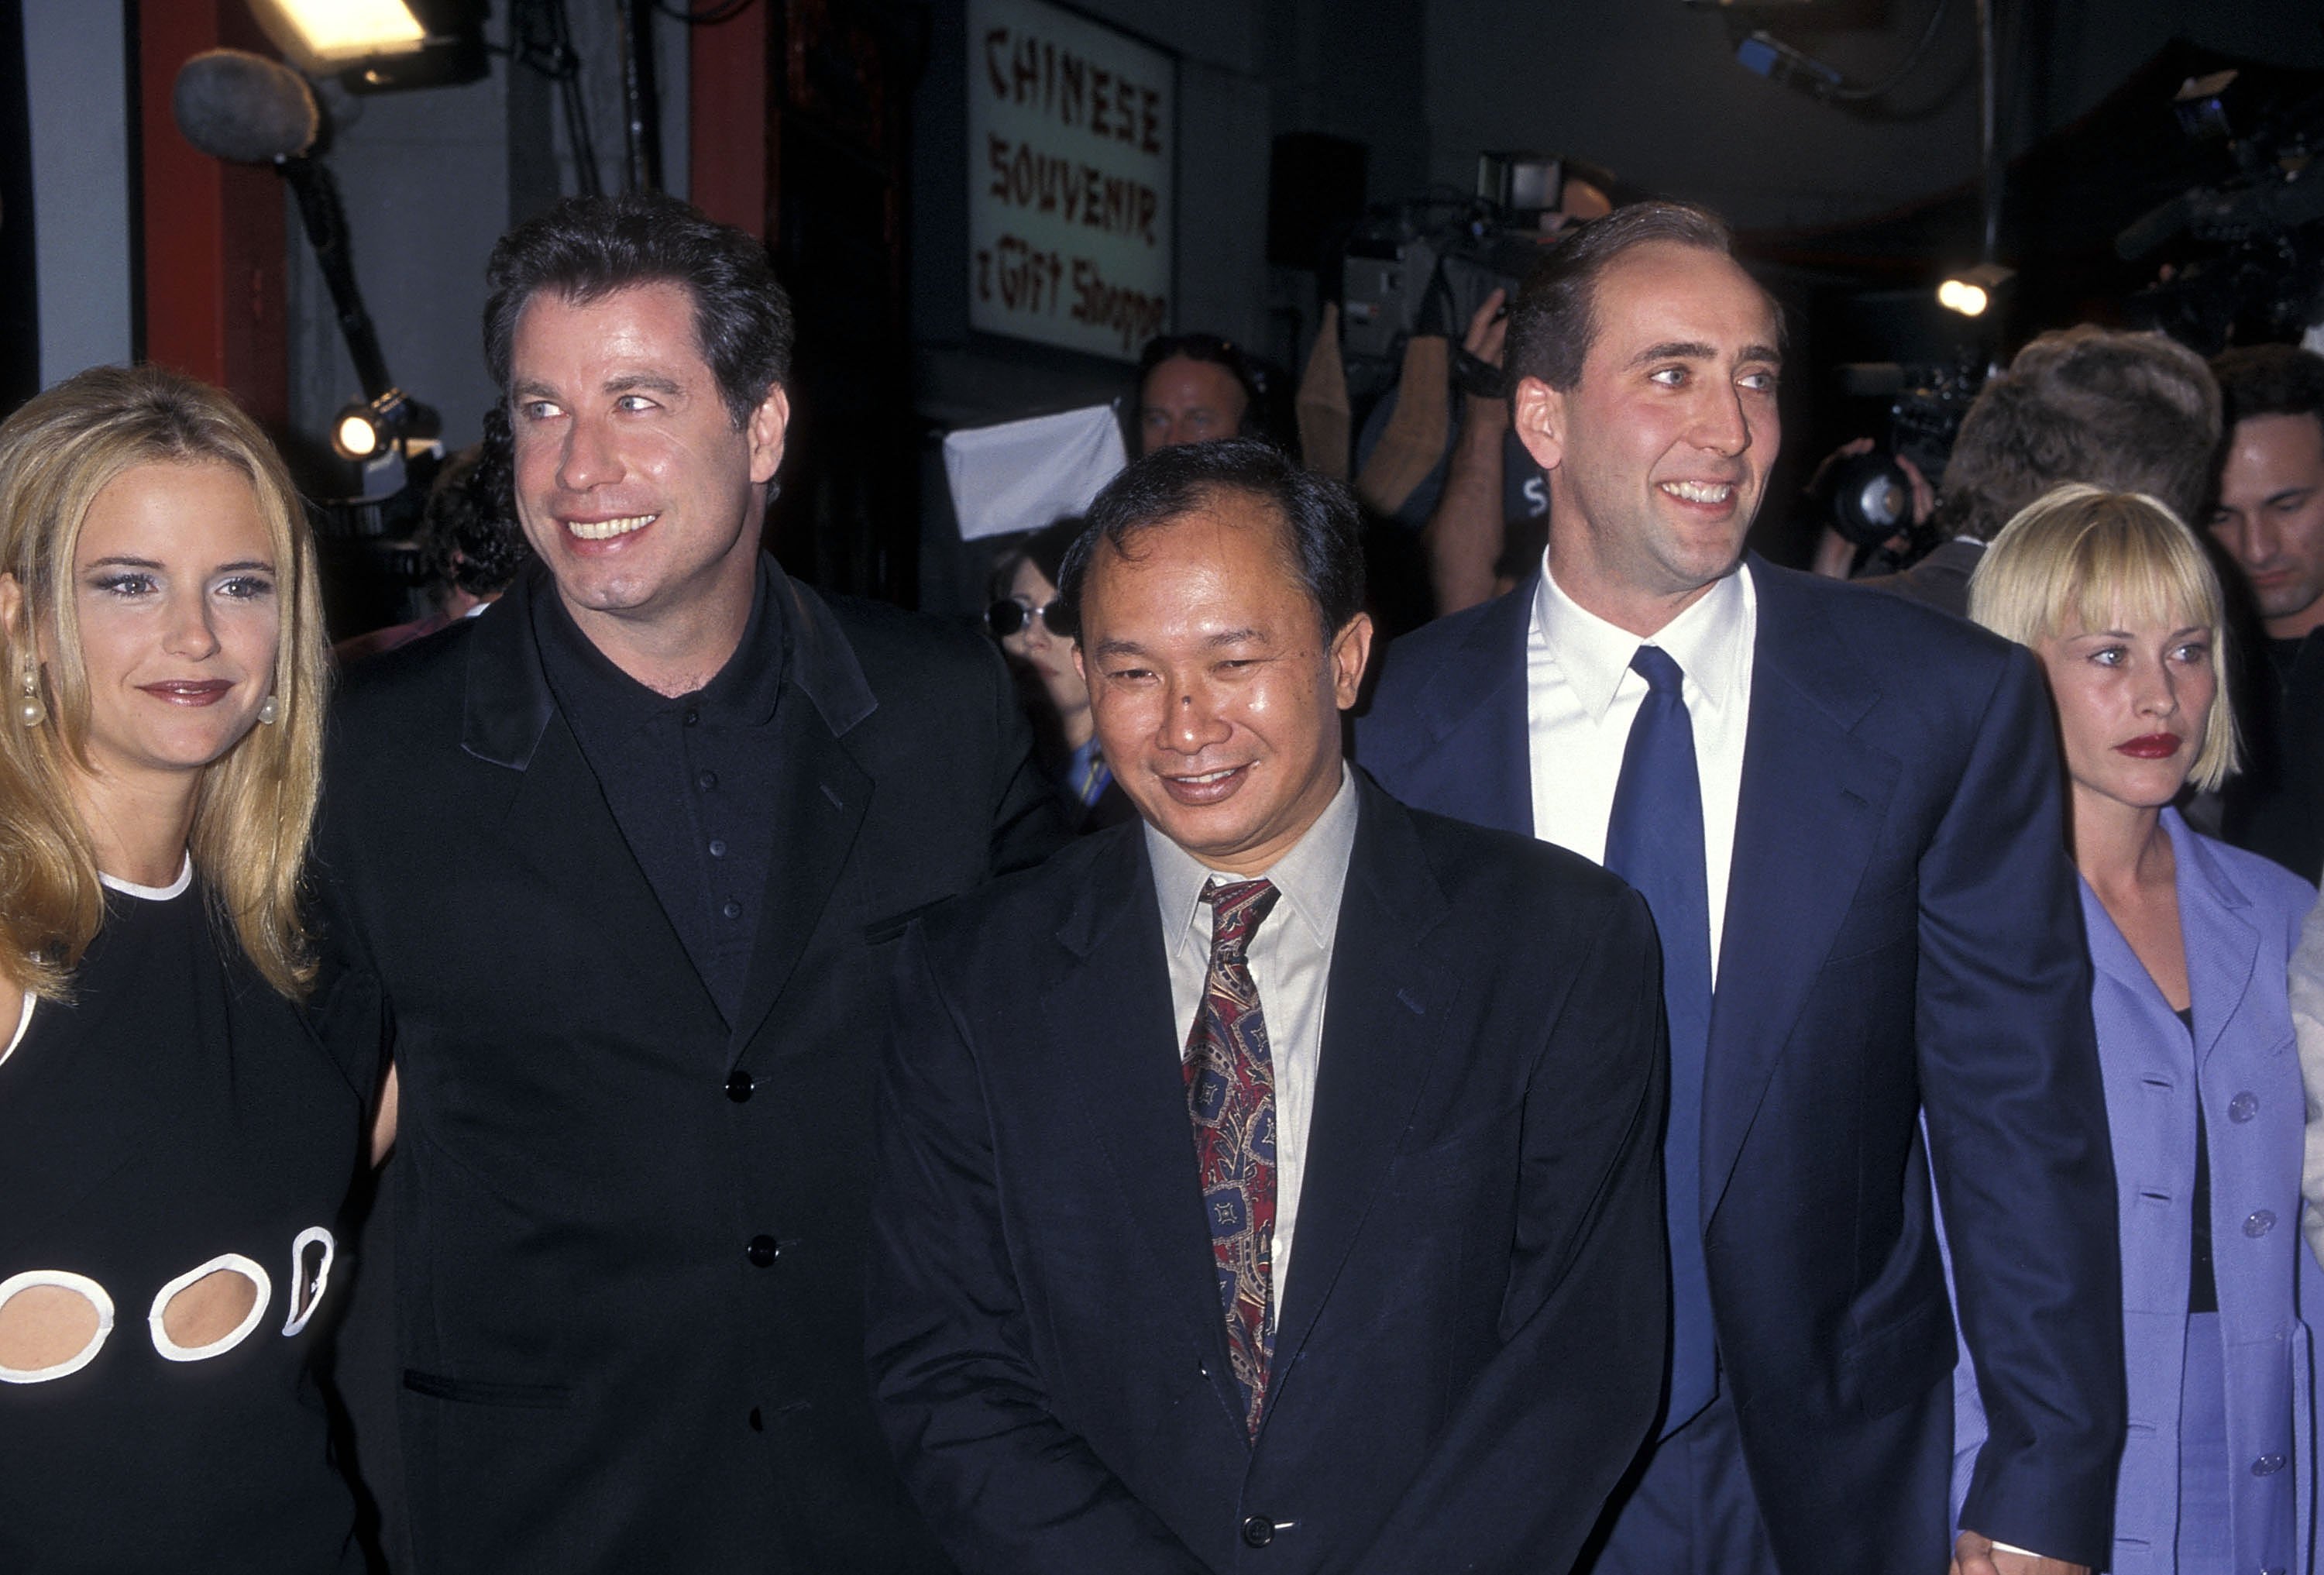 Face/Off 2 future stars John Travoltas at the 1997 premiere with their wives and John Woo